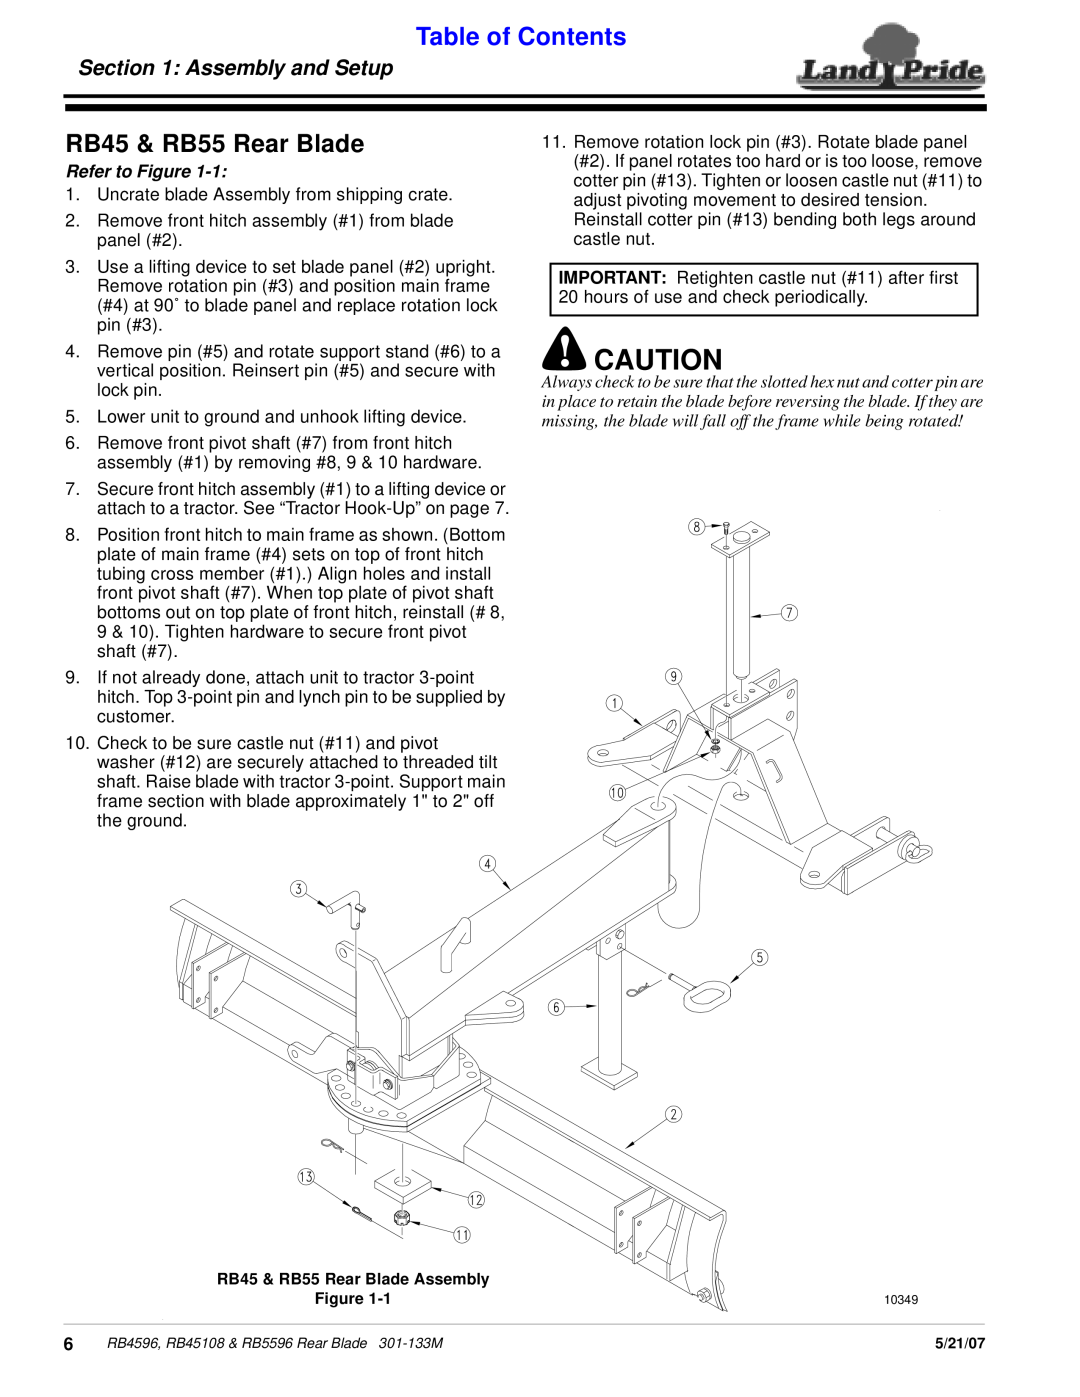 Land Pride RB45108, RB5596, RB4596 manual RB45 & RB55 Rear Blade, Assembly and Setup, Refer to Figure, Table of Contents 